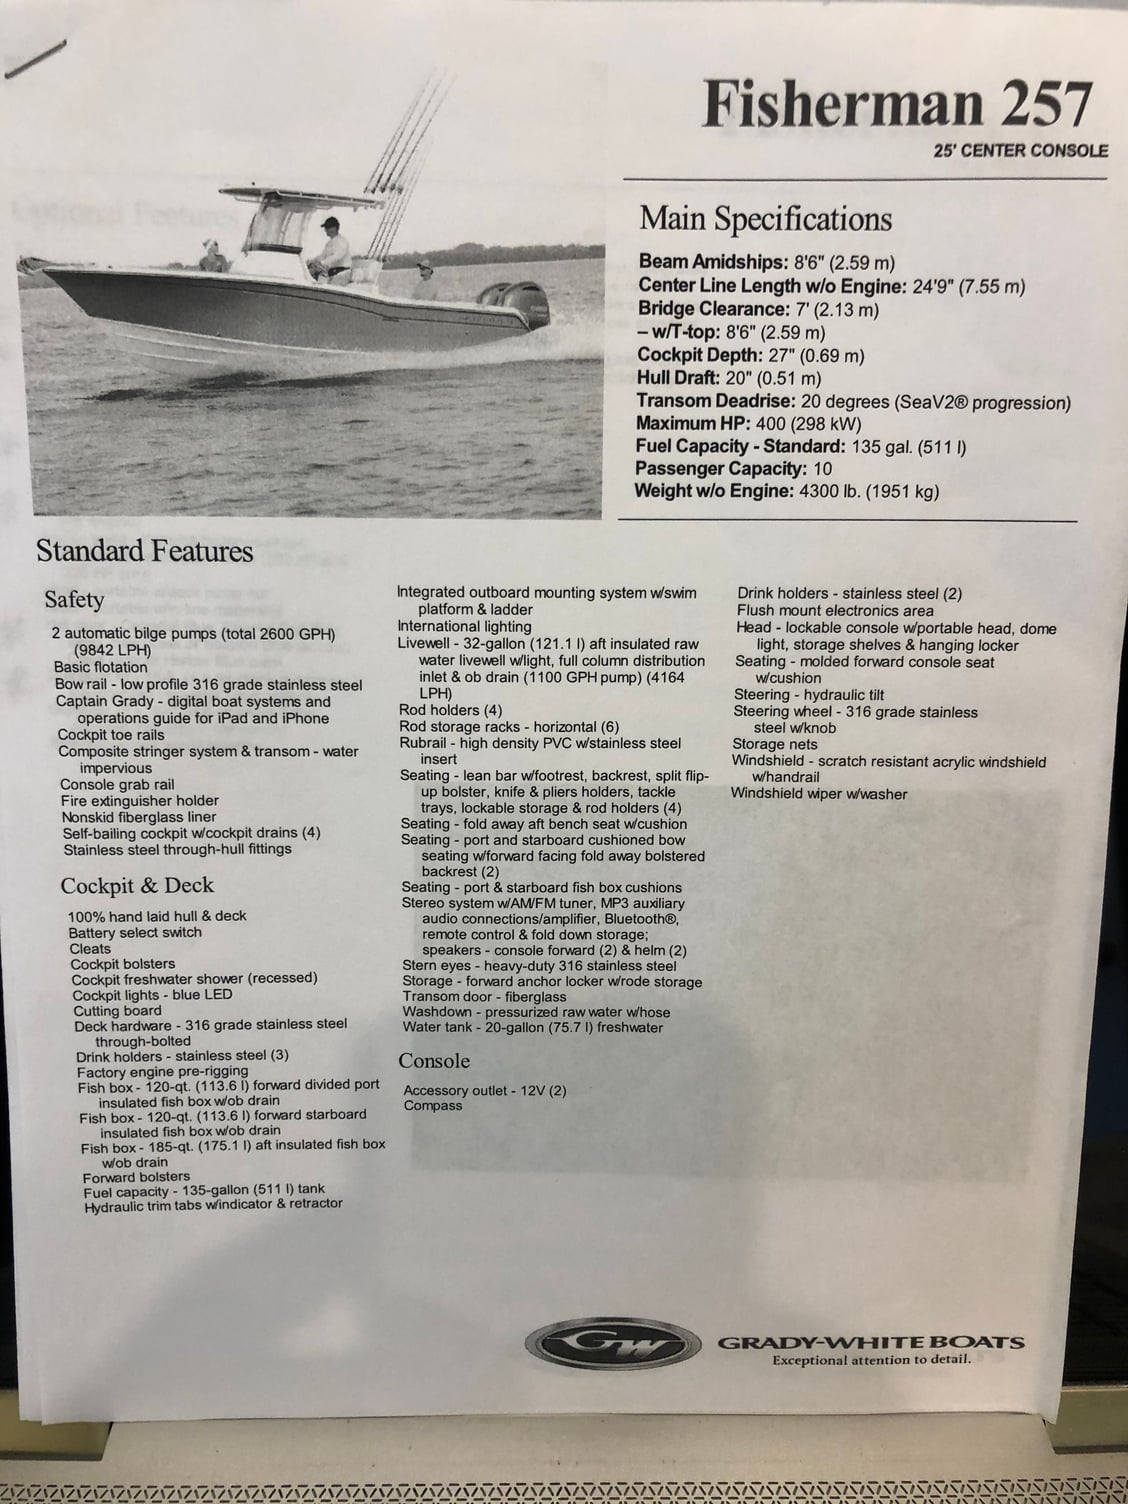 2019 Grady-White 257 Fisherman - The Hull Truth - Boating and Fishing Forum